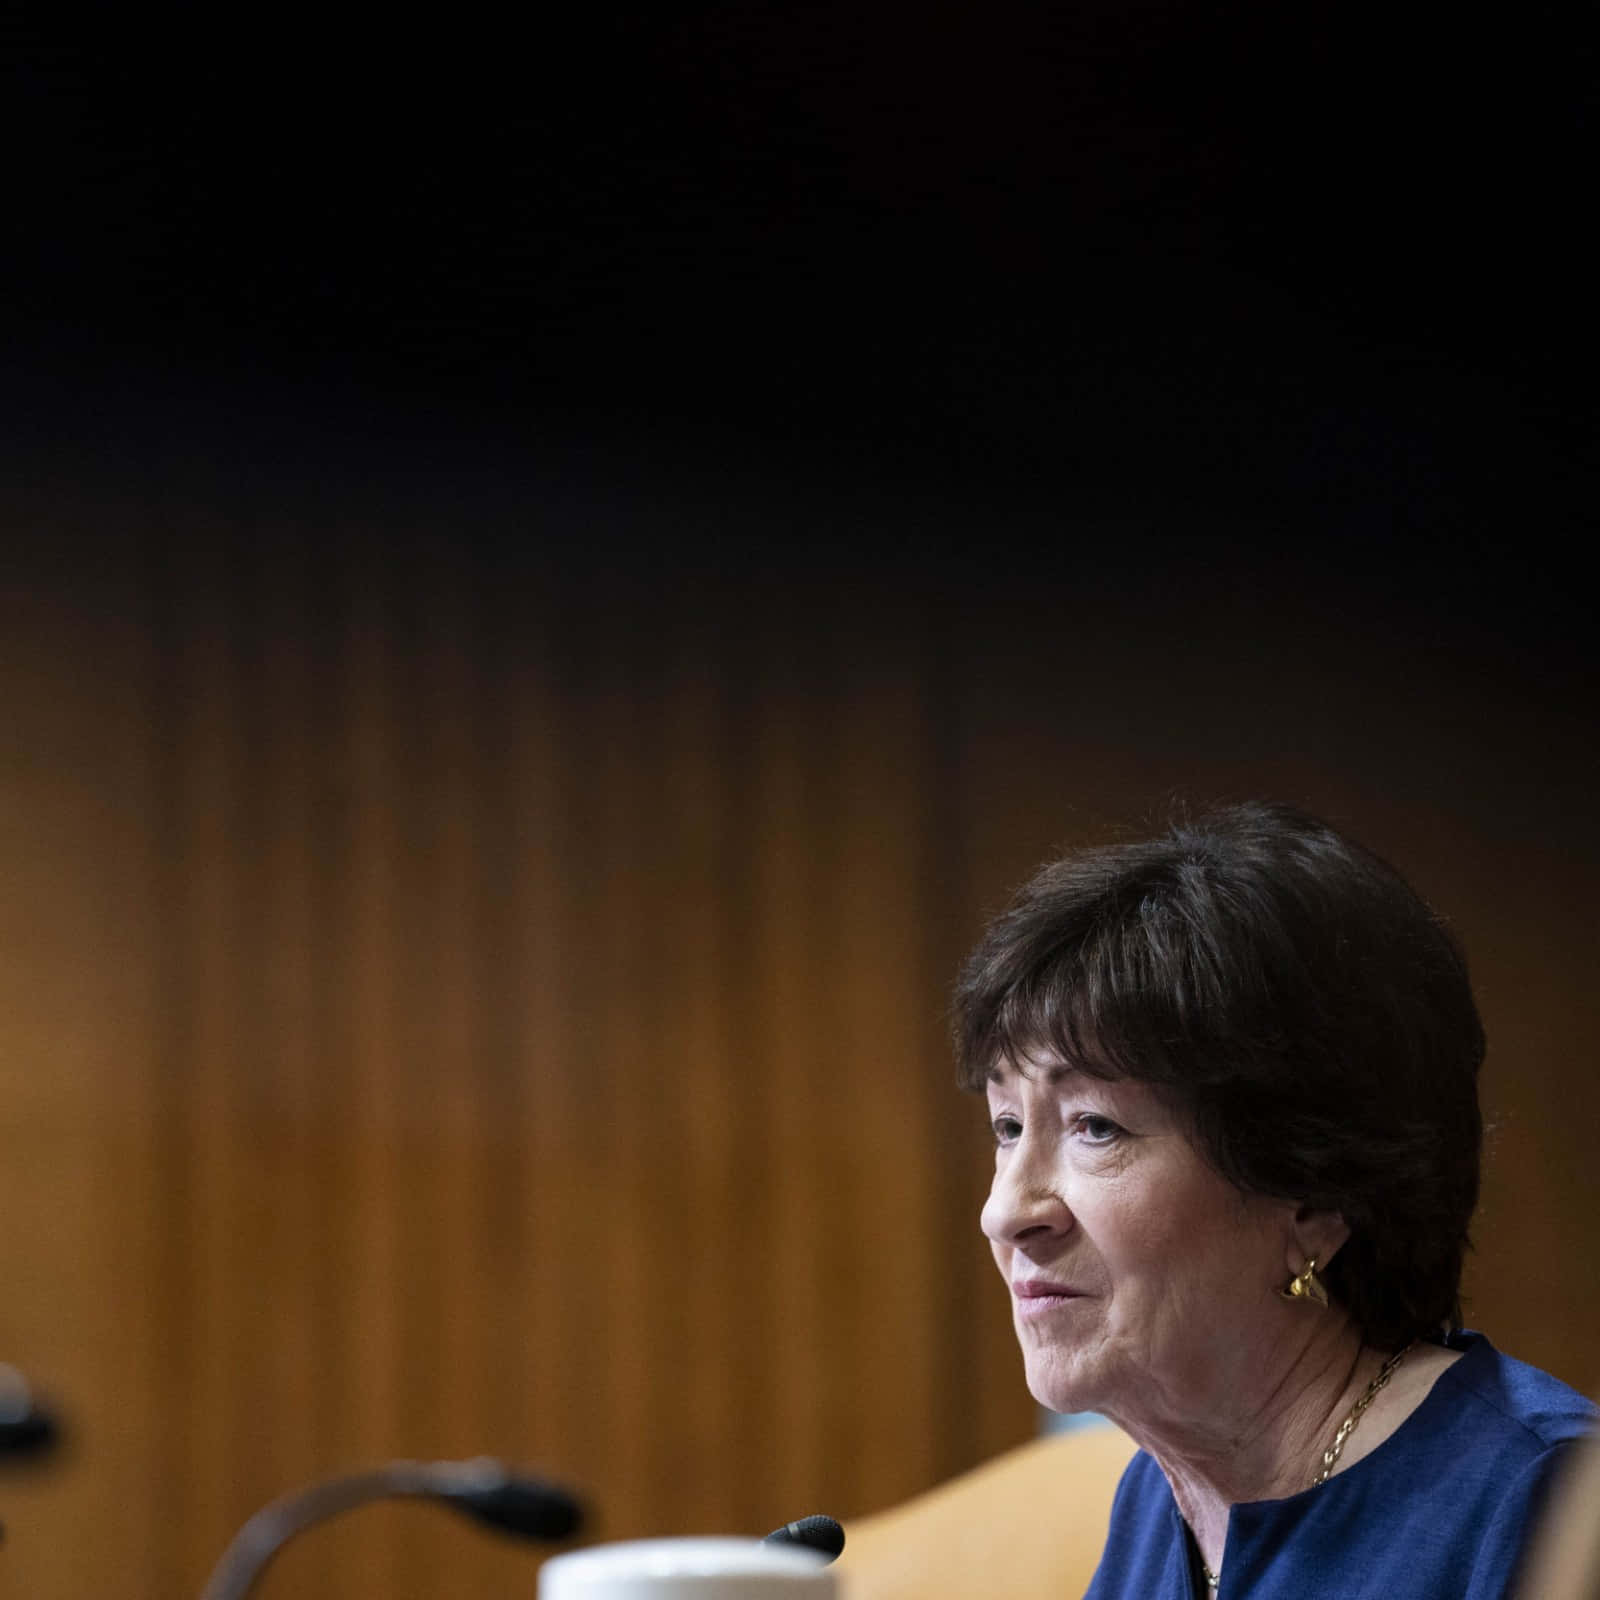 Susan Collins Speaking on the Phone Wallpaper